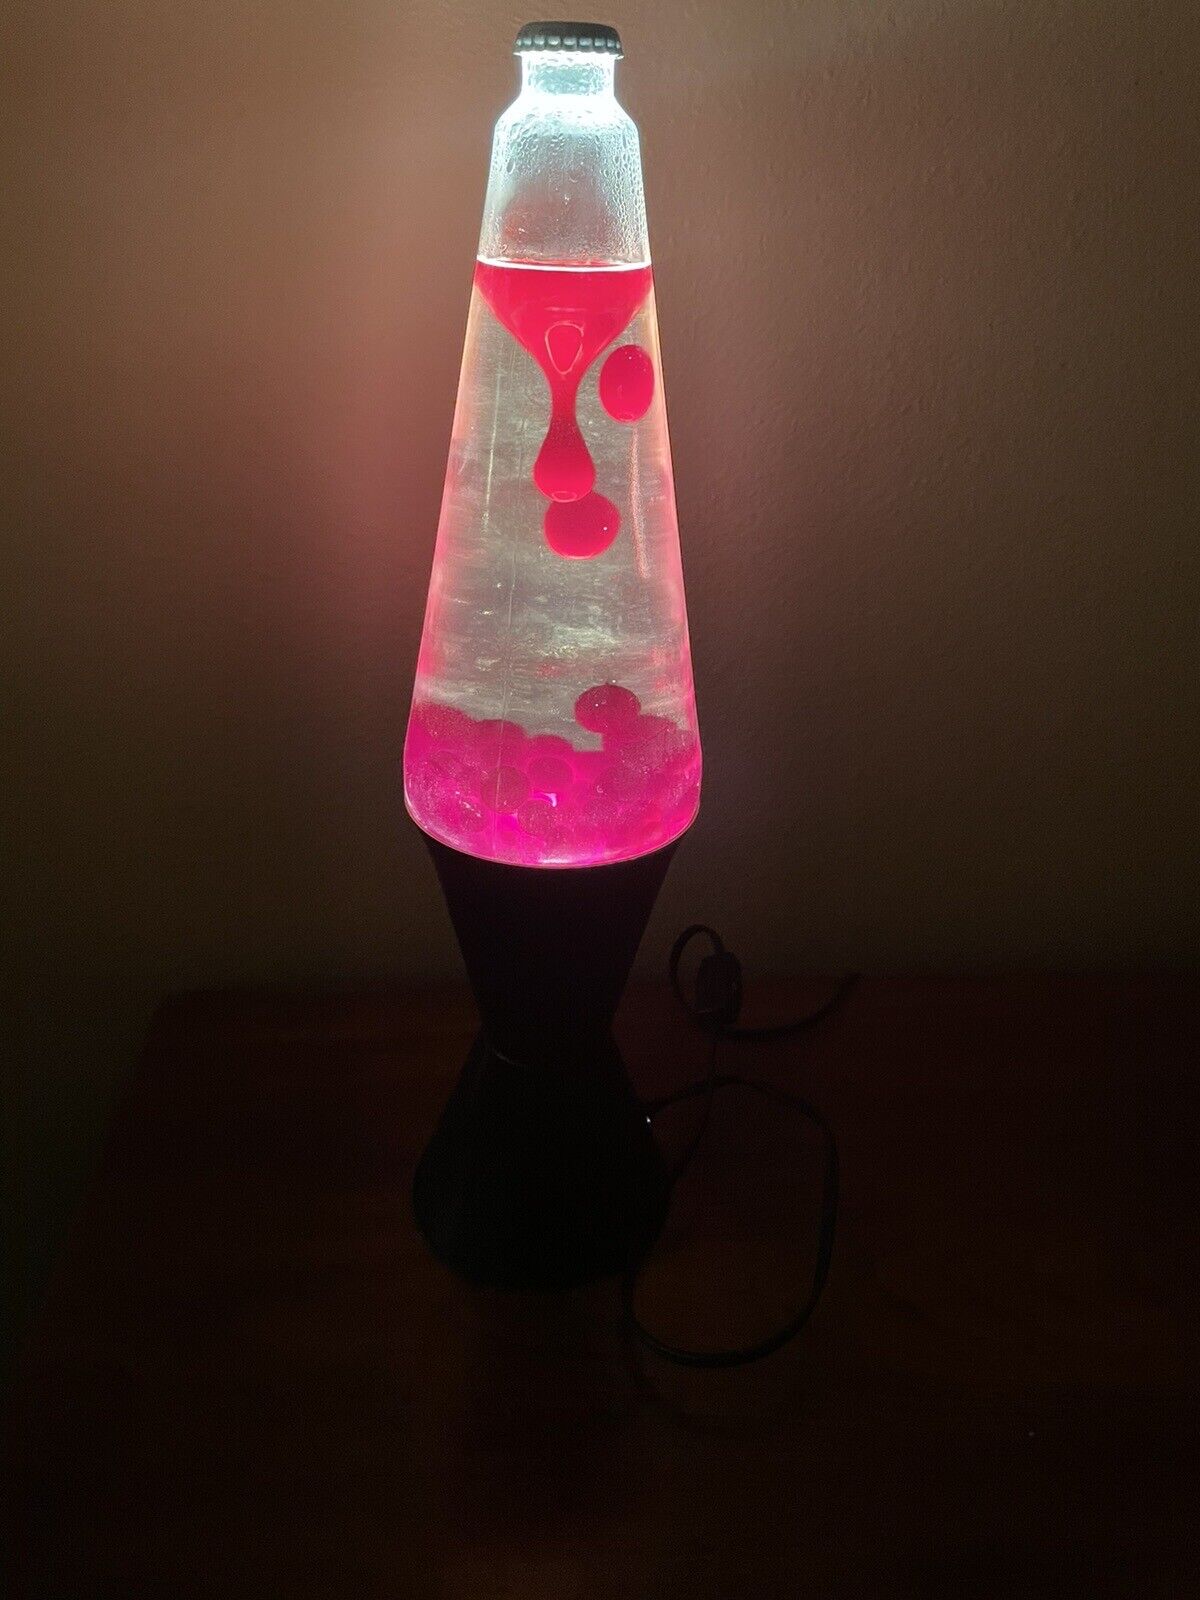 Vintage 1990s Lava Lamp Lite Red with Clear Liquid-Black Base Tested & Works